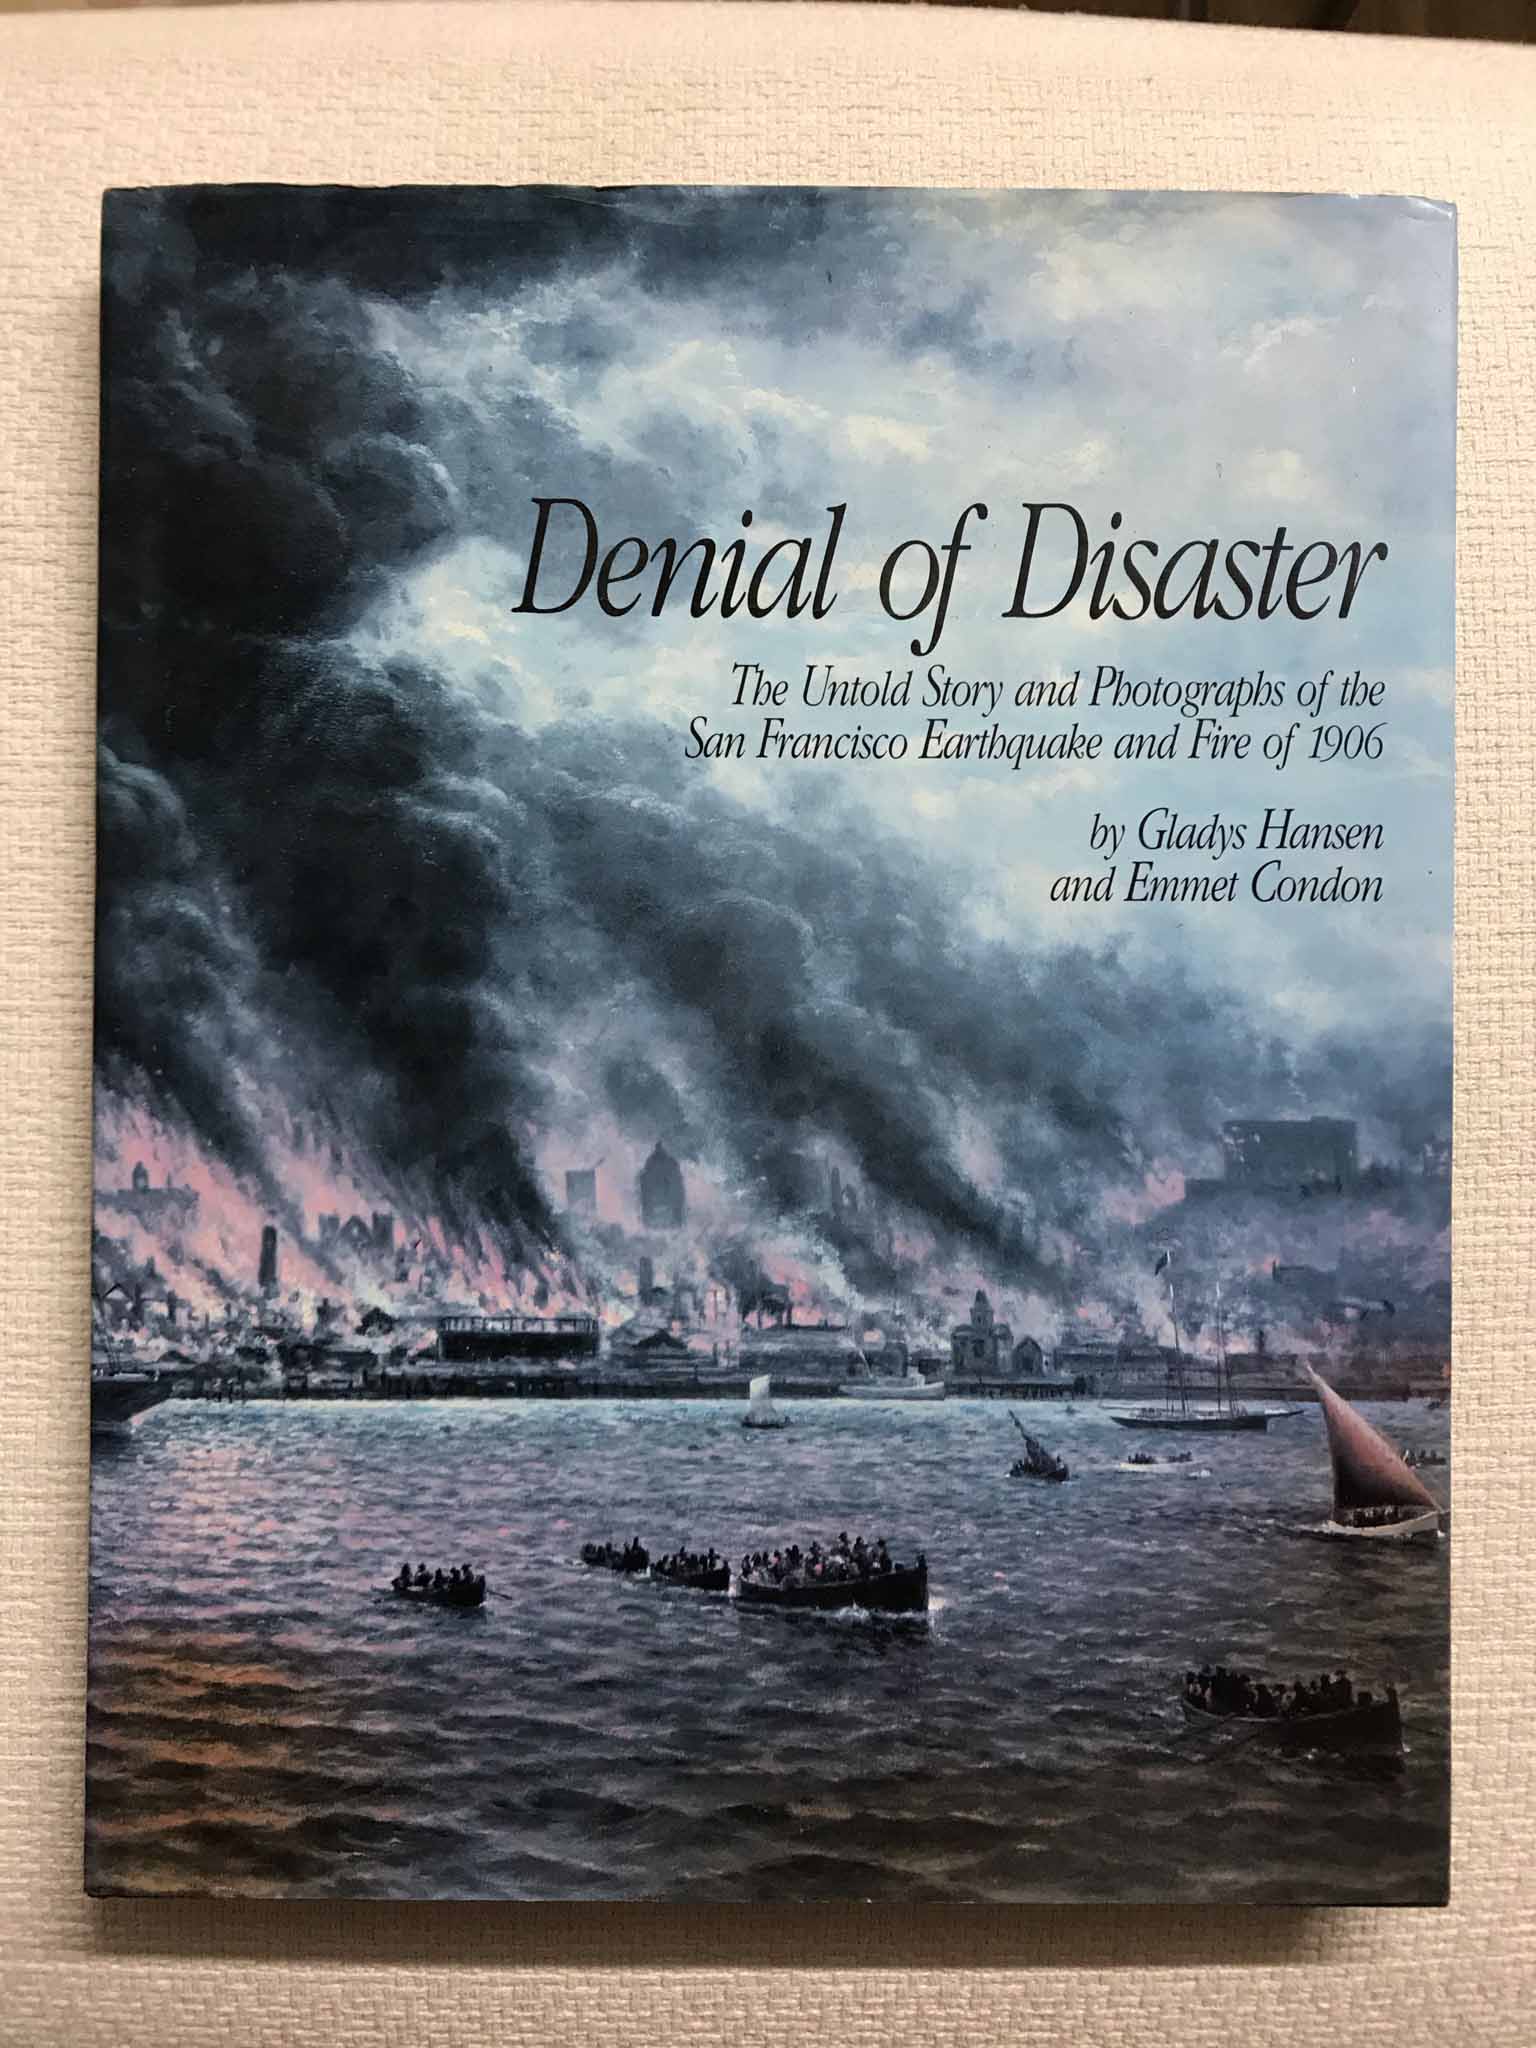 Denial of Disaster. The Untold Story and Photographs of the San Francisco Earthquake and Fire of 1906 - Gladys Hansen / Emmet Condon